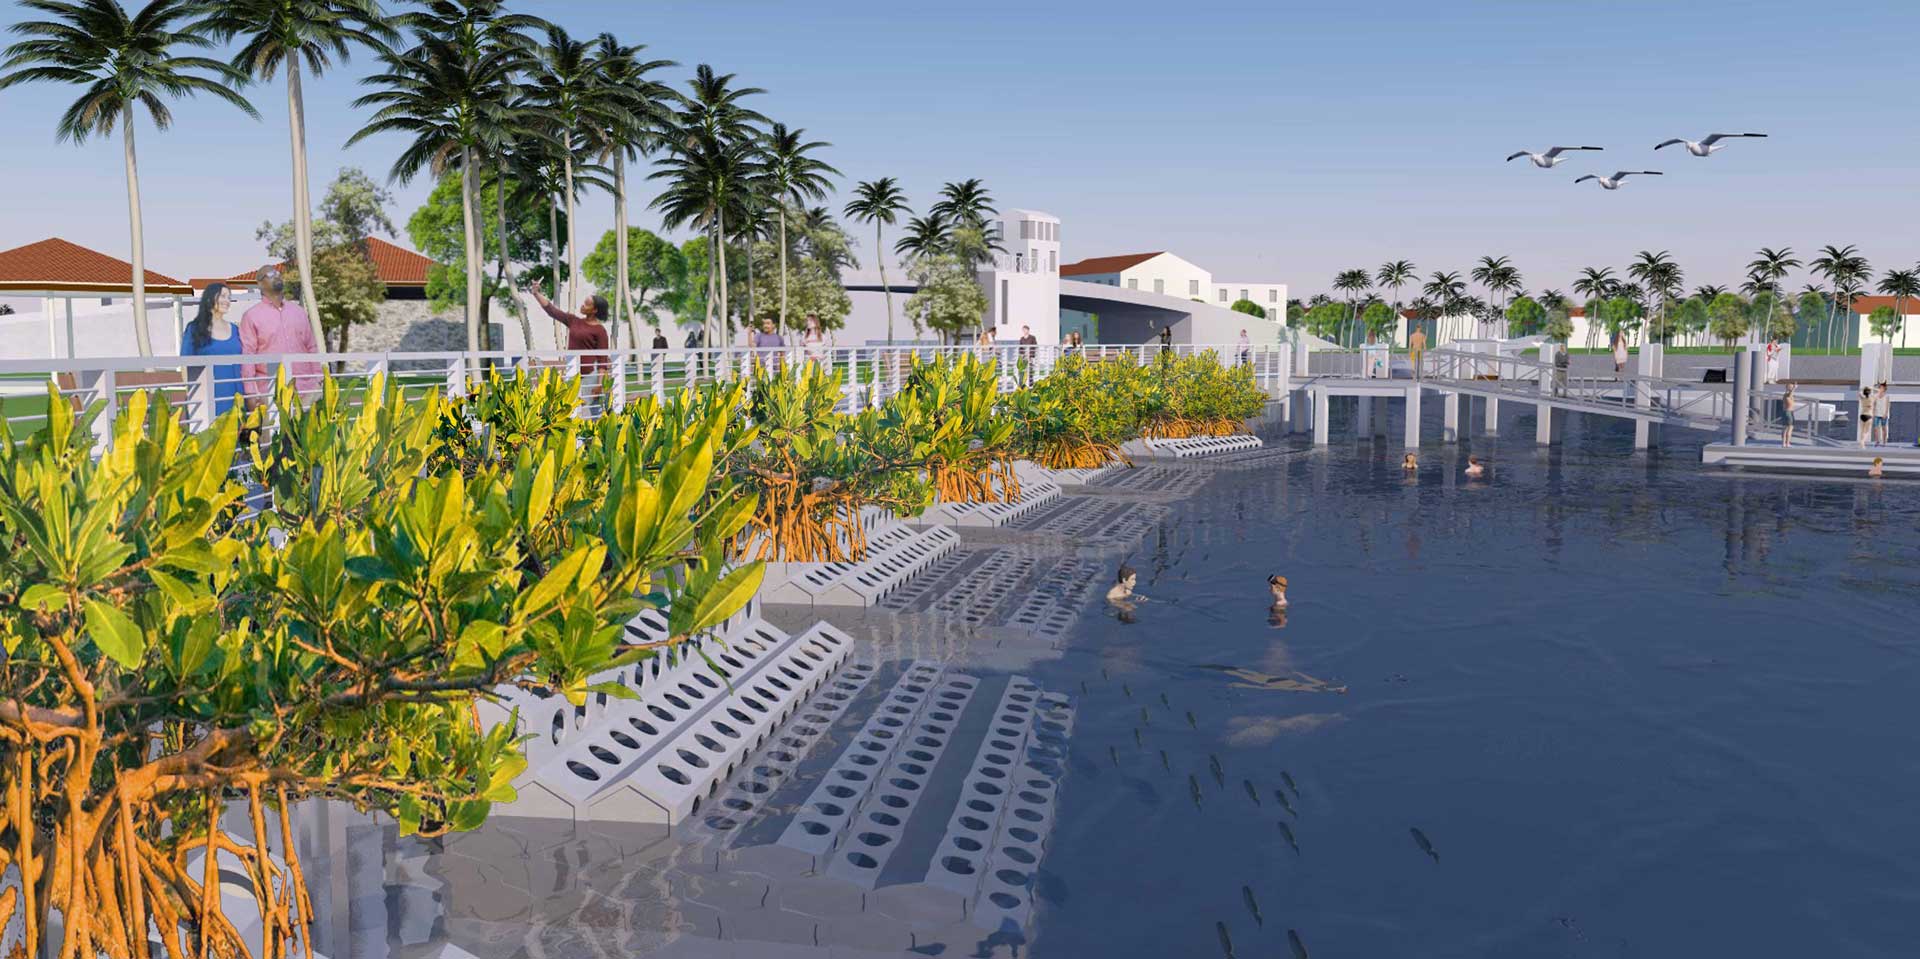 A local effort to create a new educational marine park and restore the natural habitat along the Hillsboro Inlet in Pompano Beach